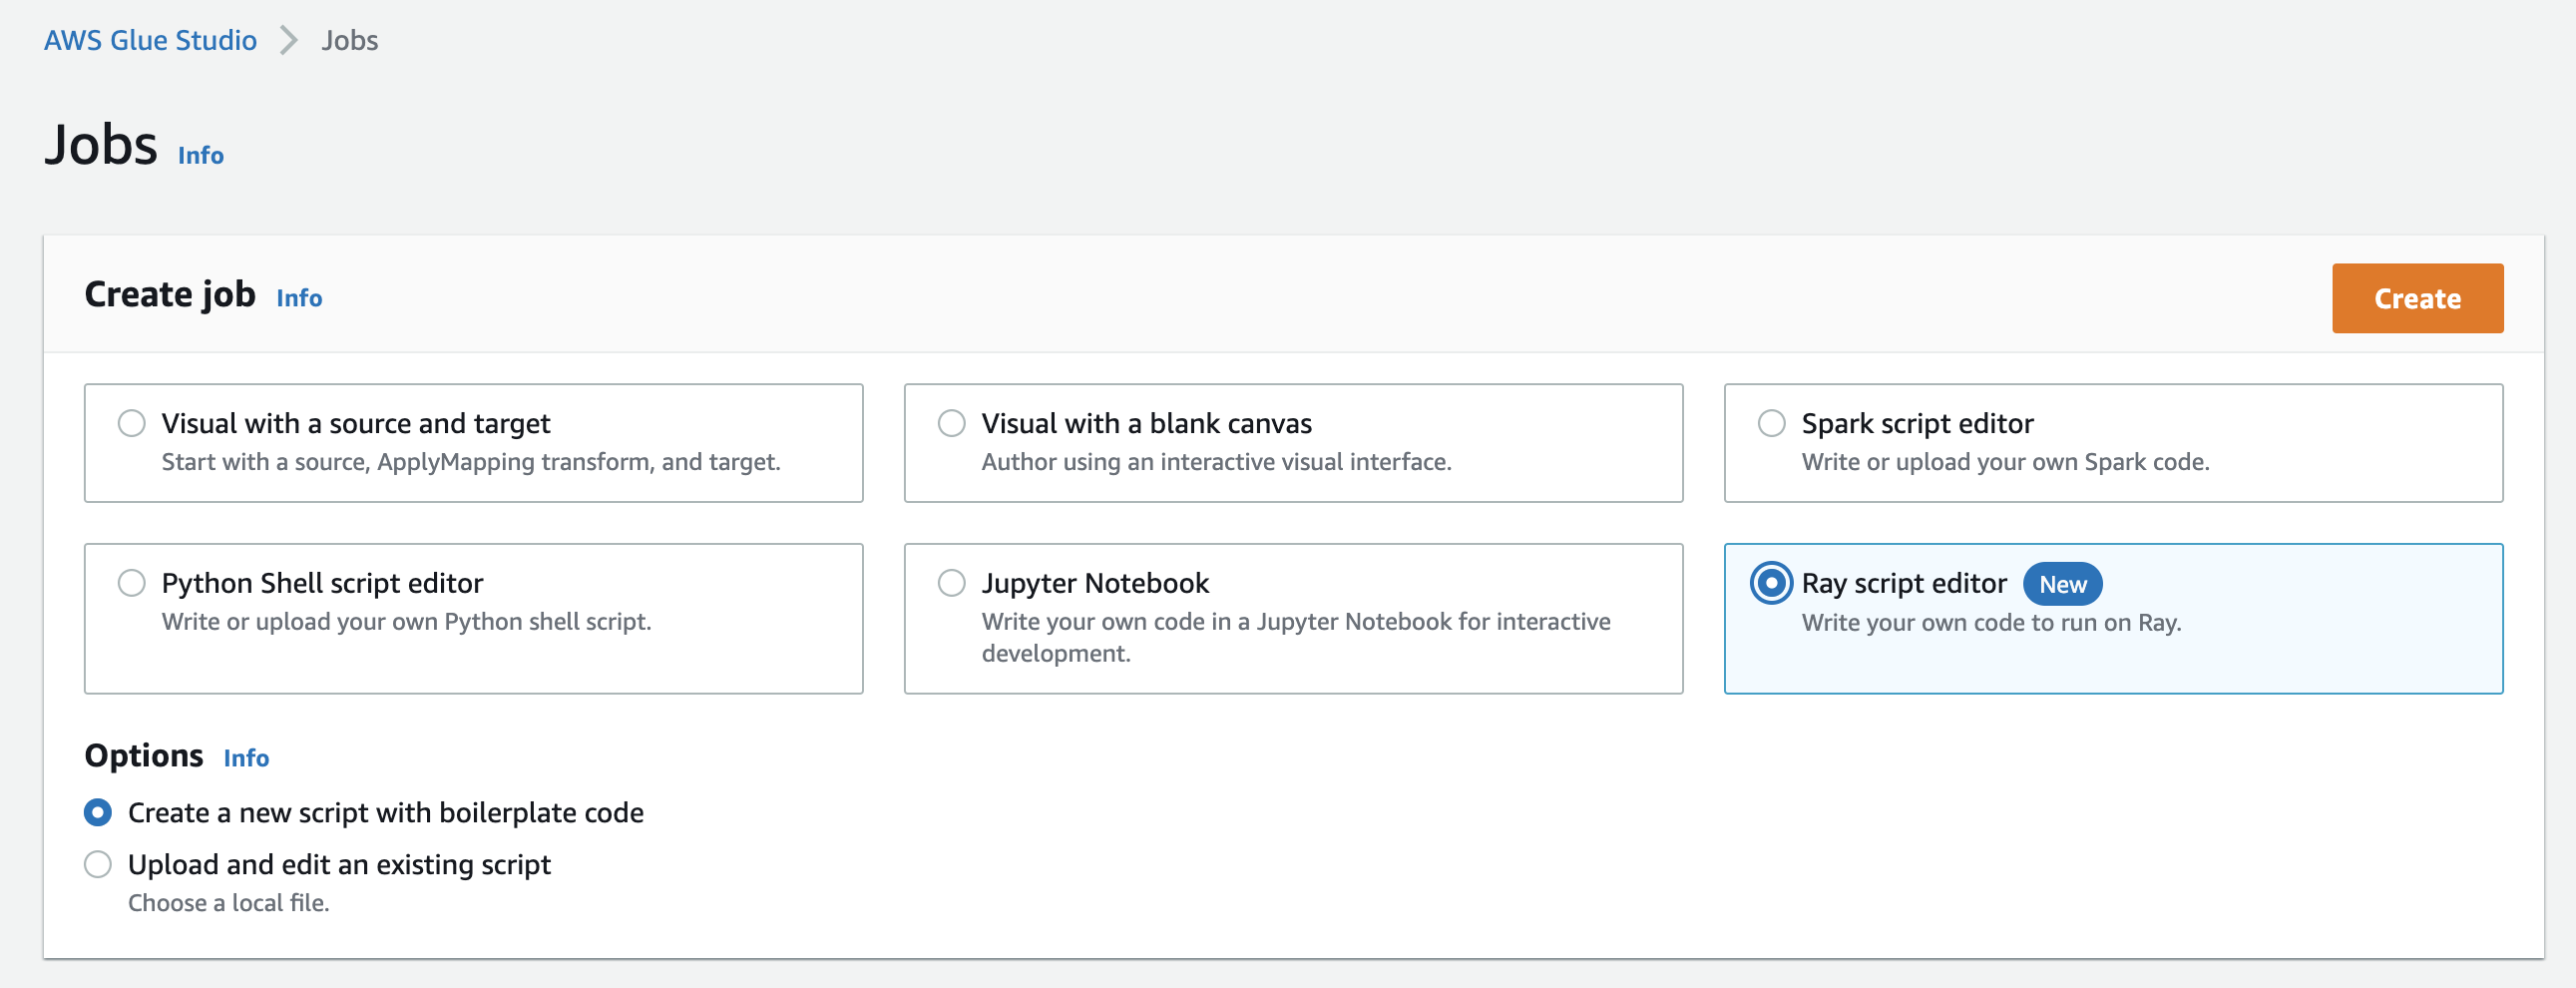 
                The Jobs page in AWS Glue Studio with the Ray script editor
                    option selected.
            